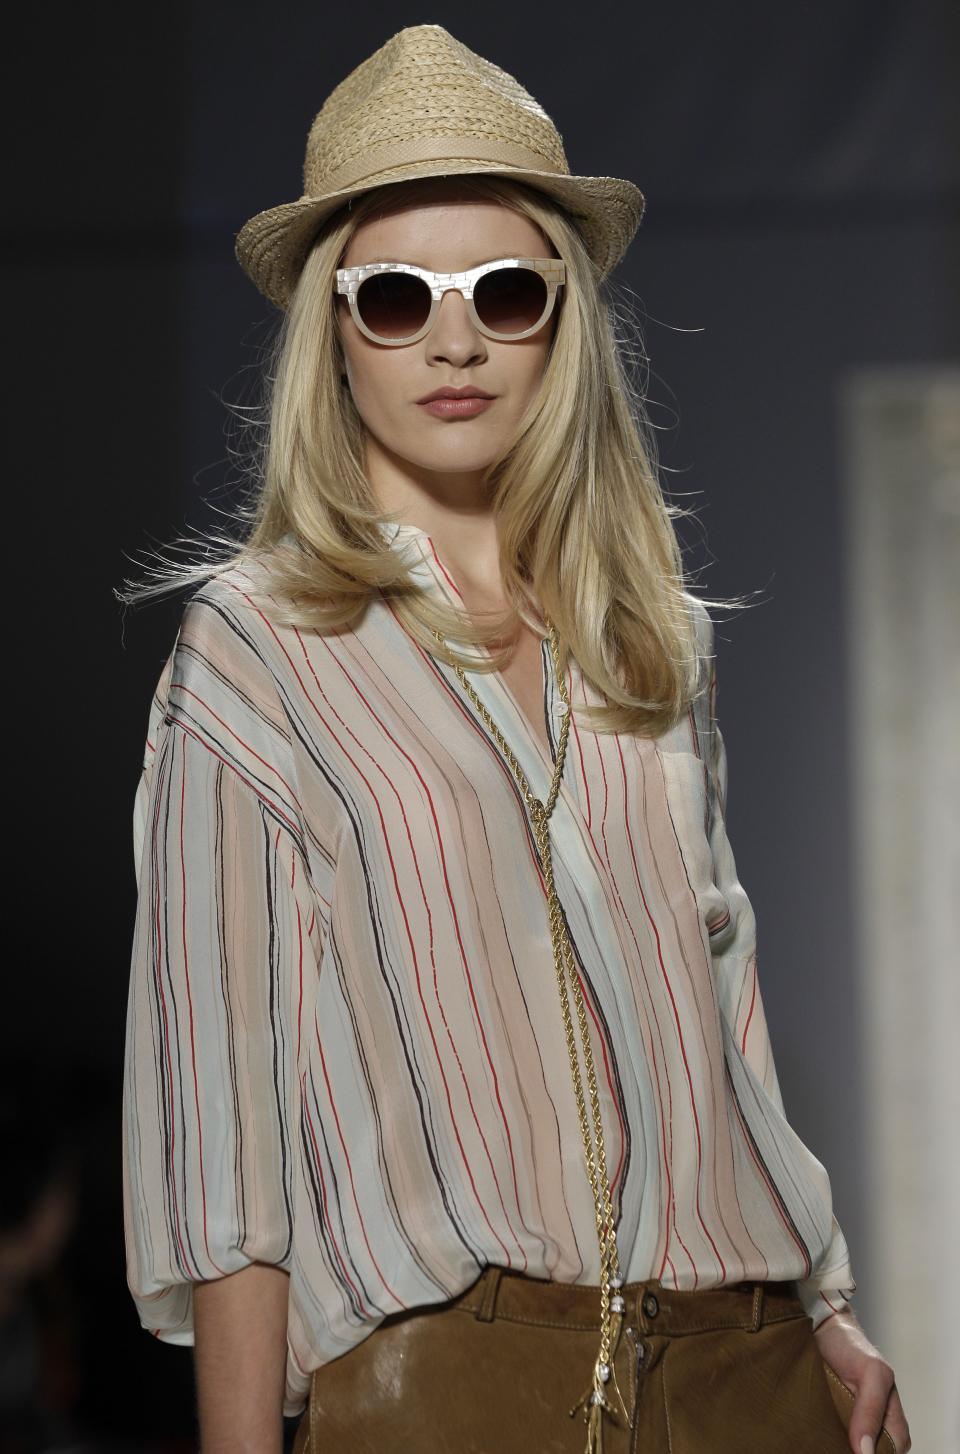 A model wears a design from the Rachel Zoe Spring 2013 collection at Fashion Week in New York, Wednesday, Sept. 12, 2012. (AP Photo/Kathy Willens)